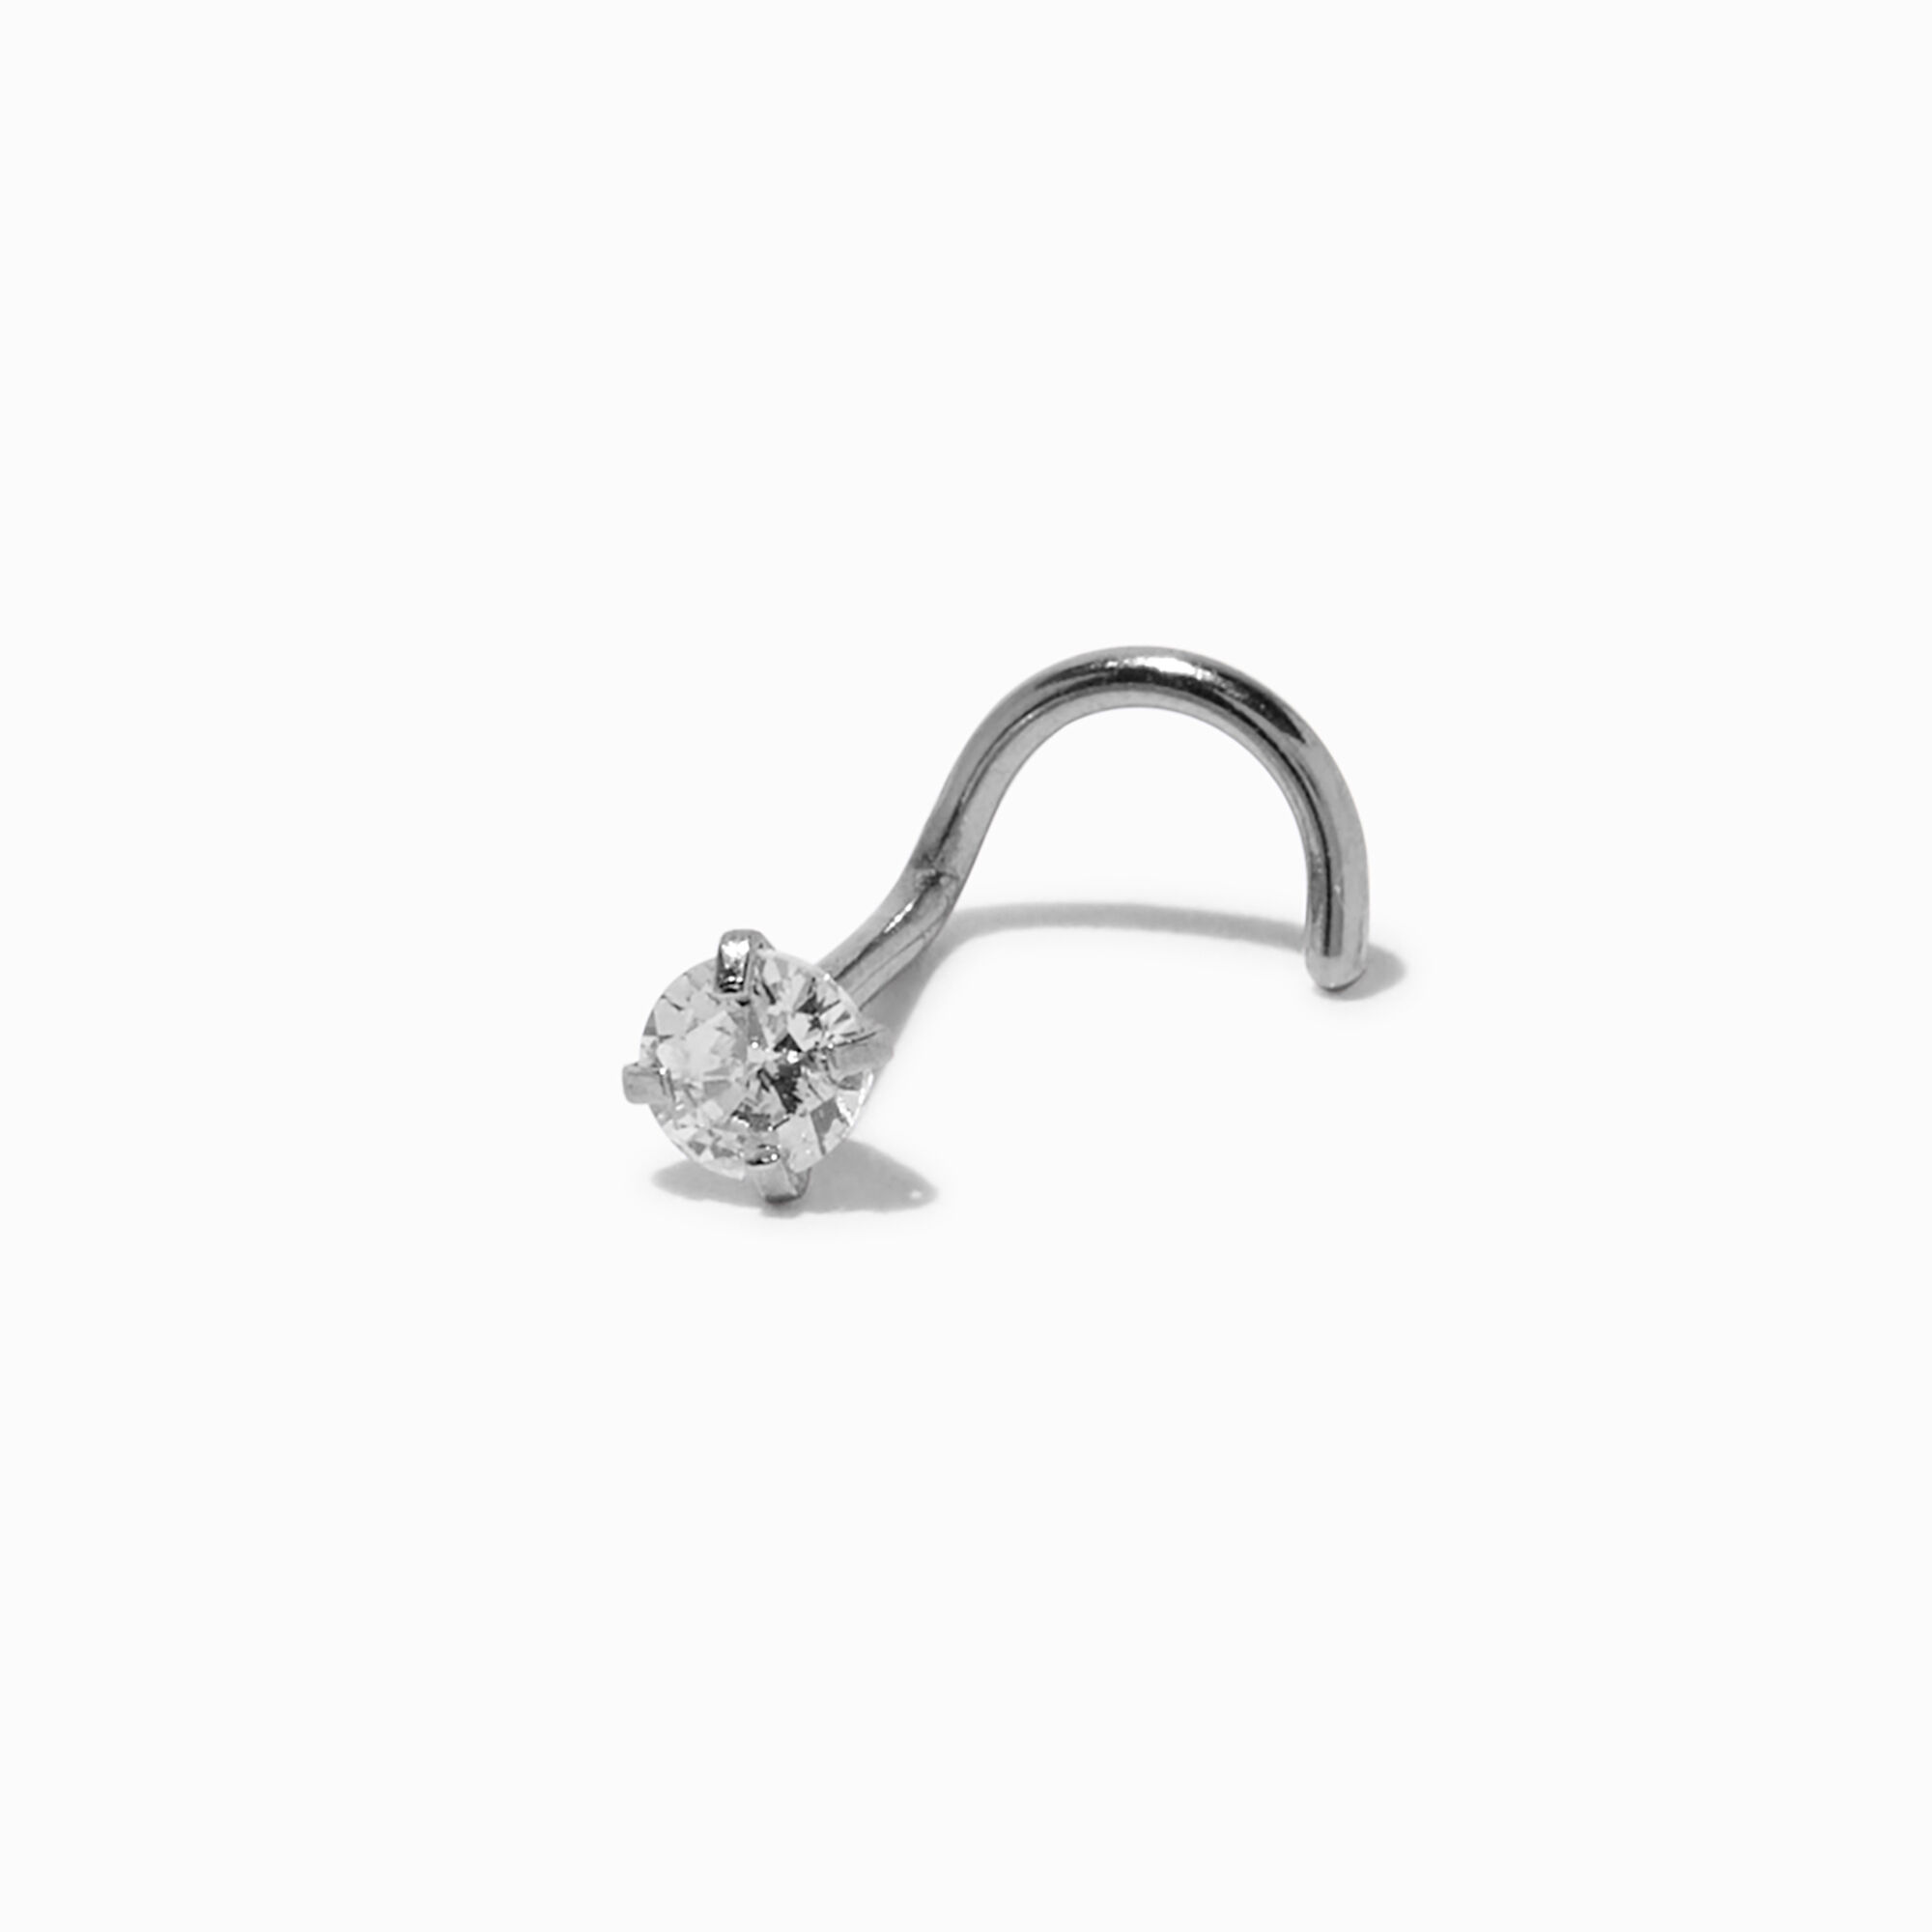 View Claires Tone Stainless Steel Cubic Zirconia 20G Threadless Nose Stud Silver information